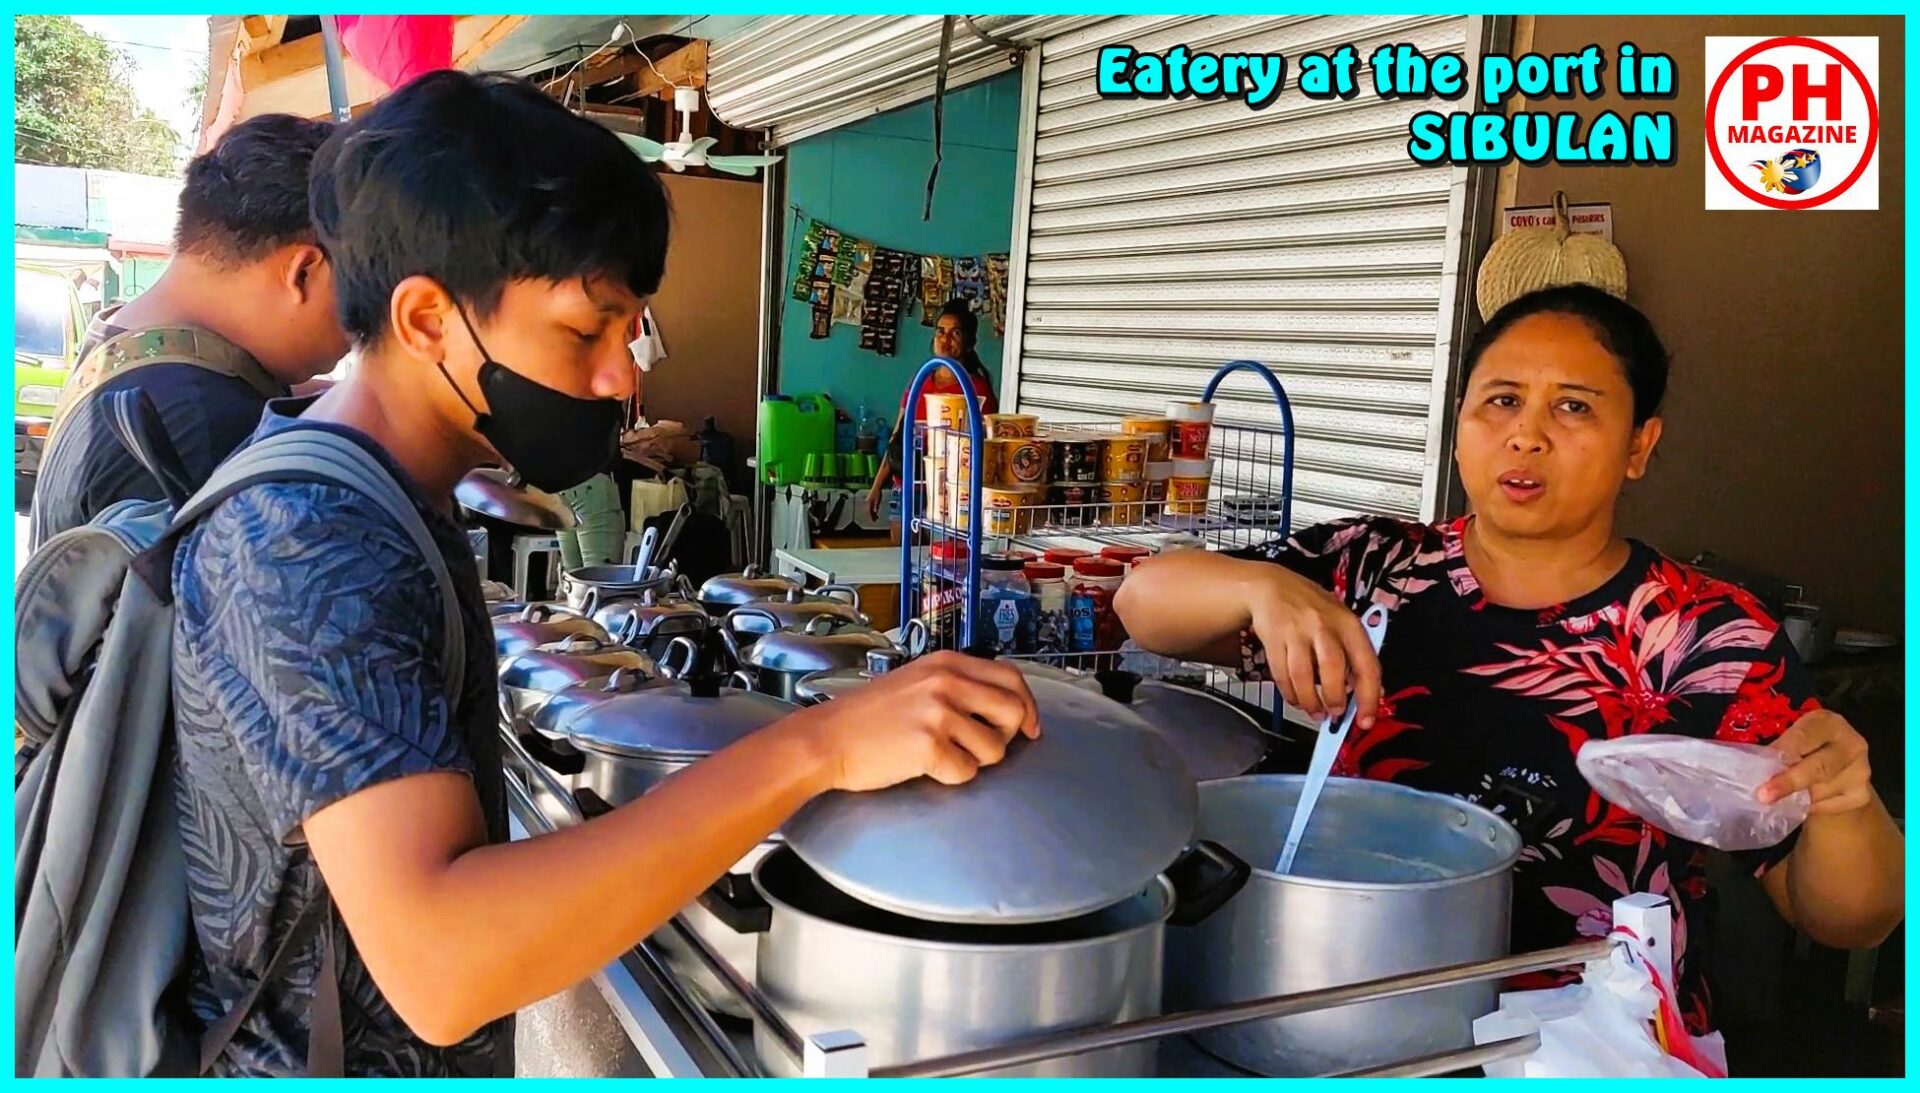 SIGHTS OF NEGROS ORIENTAL - Eatery at the port in Sibulan